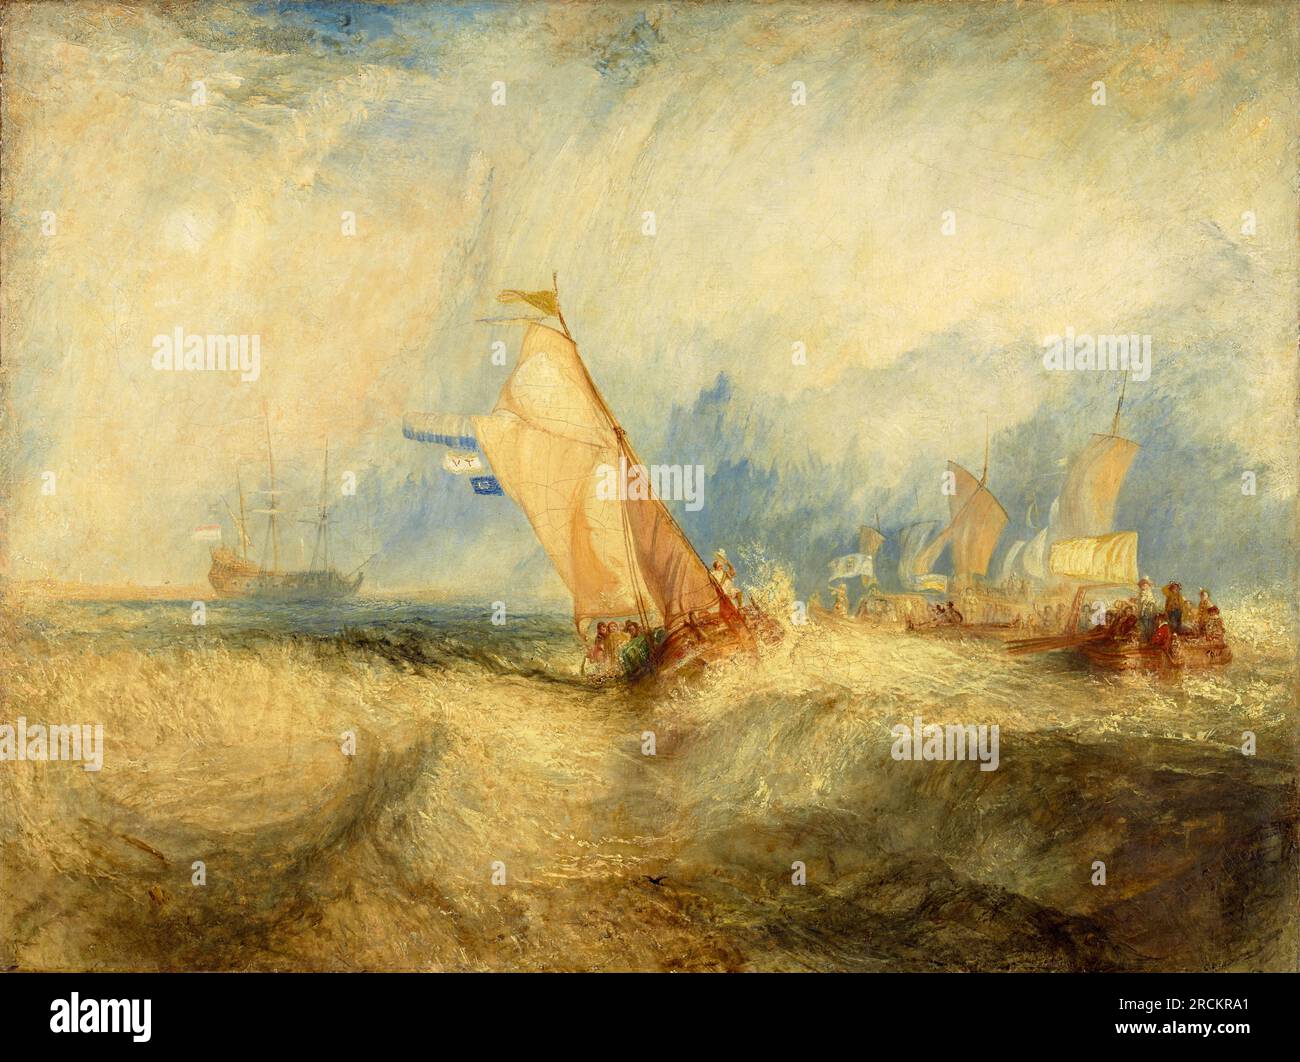 Van Tromp, going about to please his Masters, Ships a Sea, getting a Good Wetting. Joseph Mallord William Turner. 1844 Stock Photo